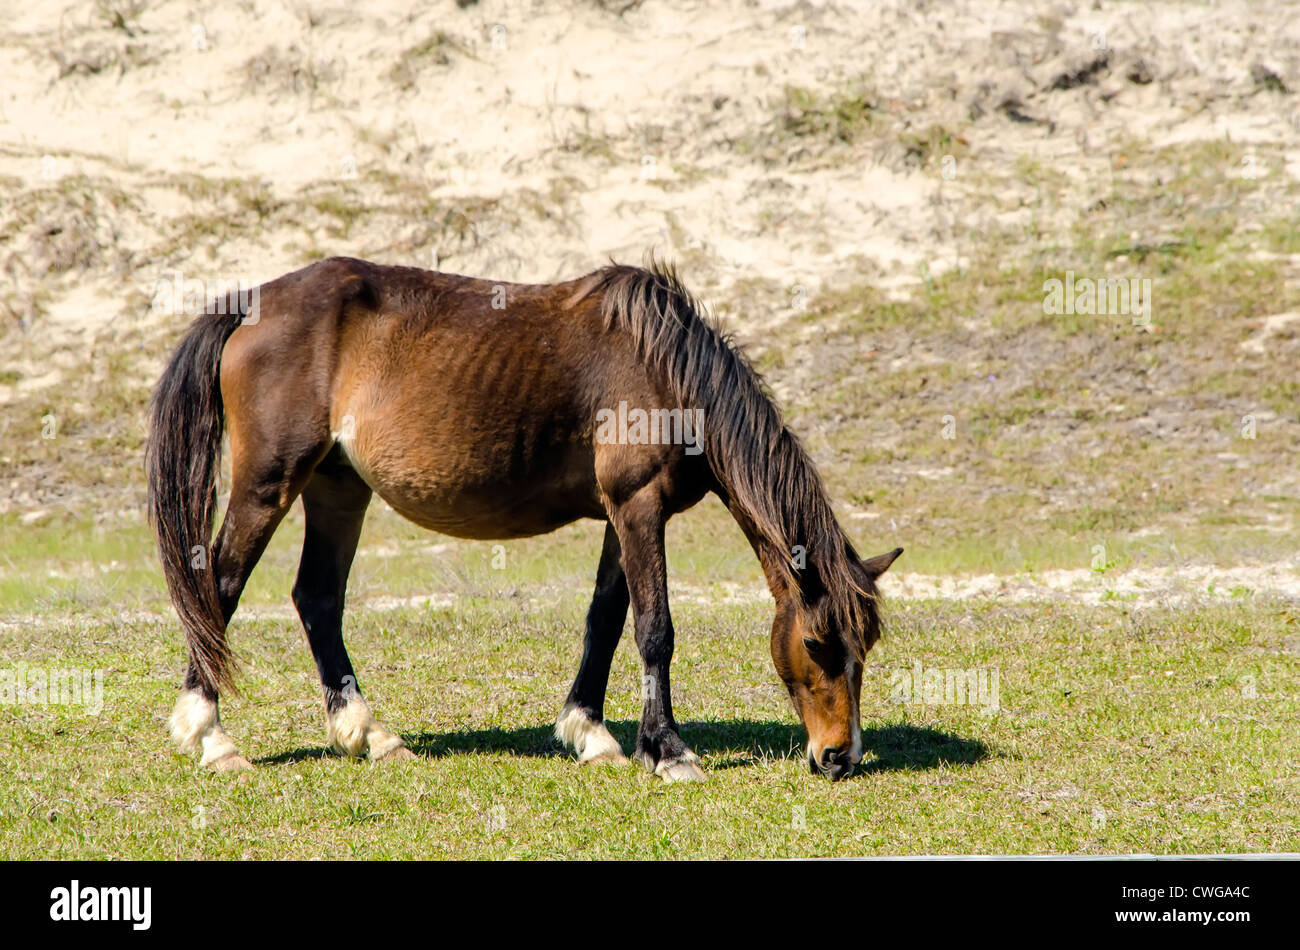 Wild Horse Grazing on Grass Currituck County on North Carolina Outer Banks Stock Photo